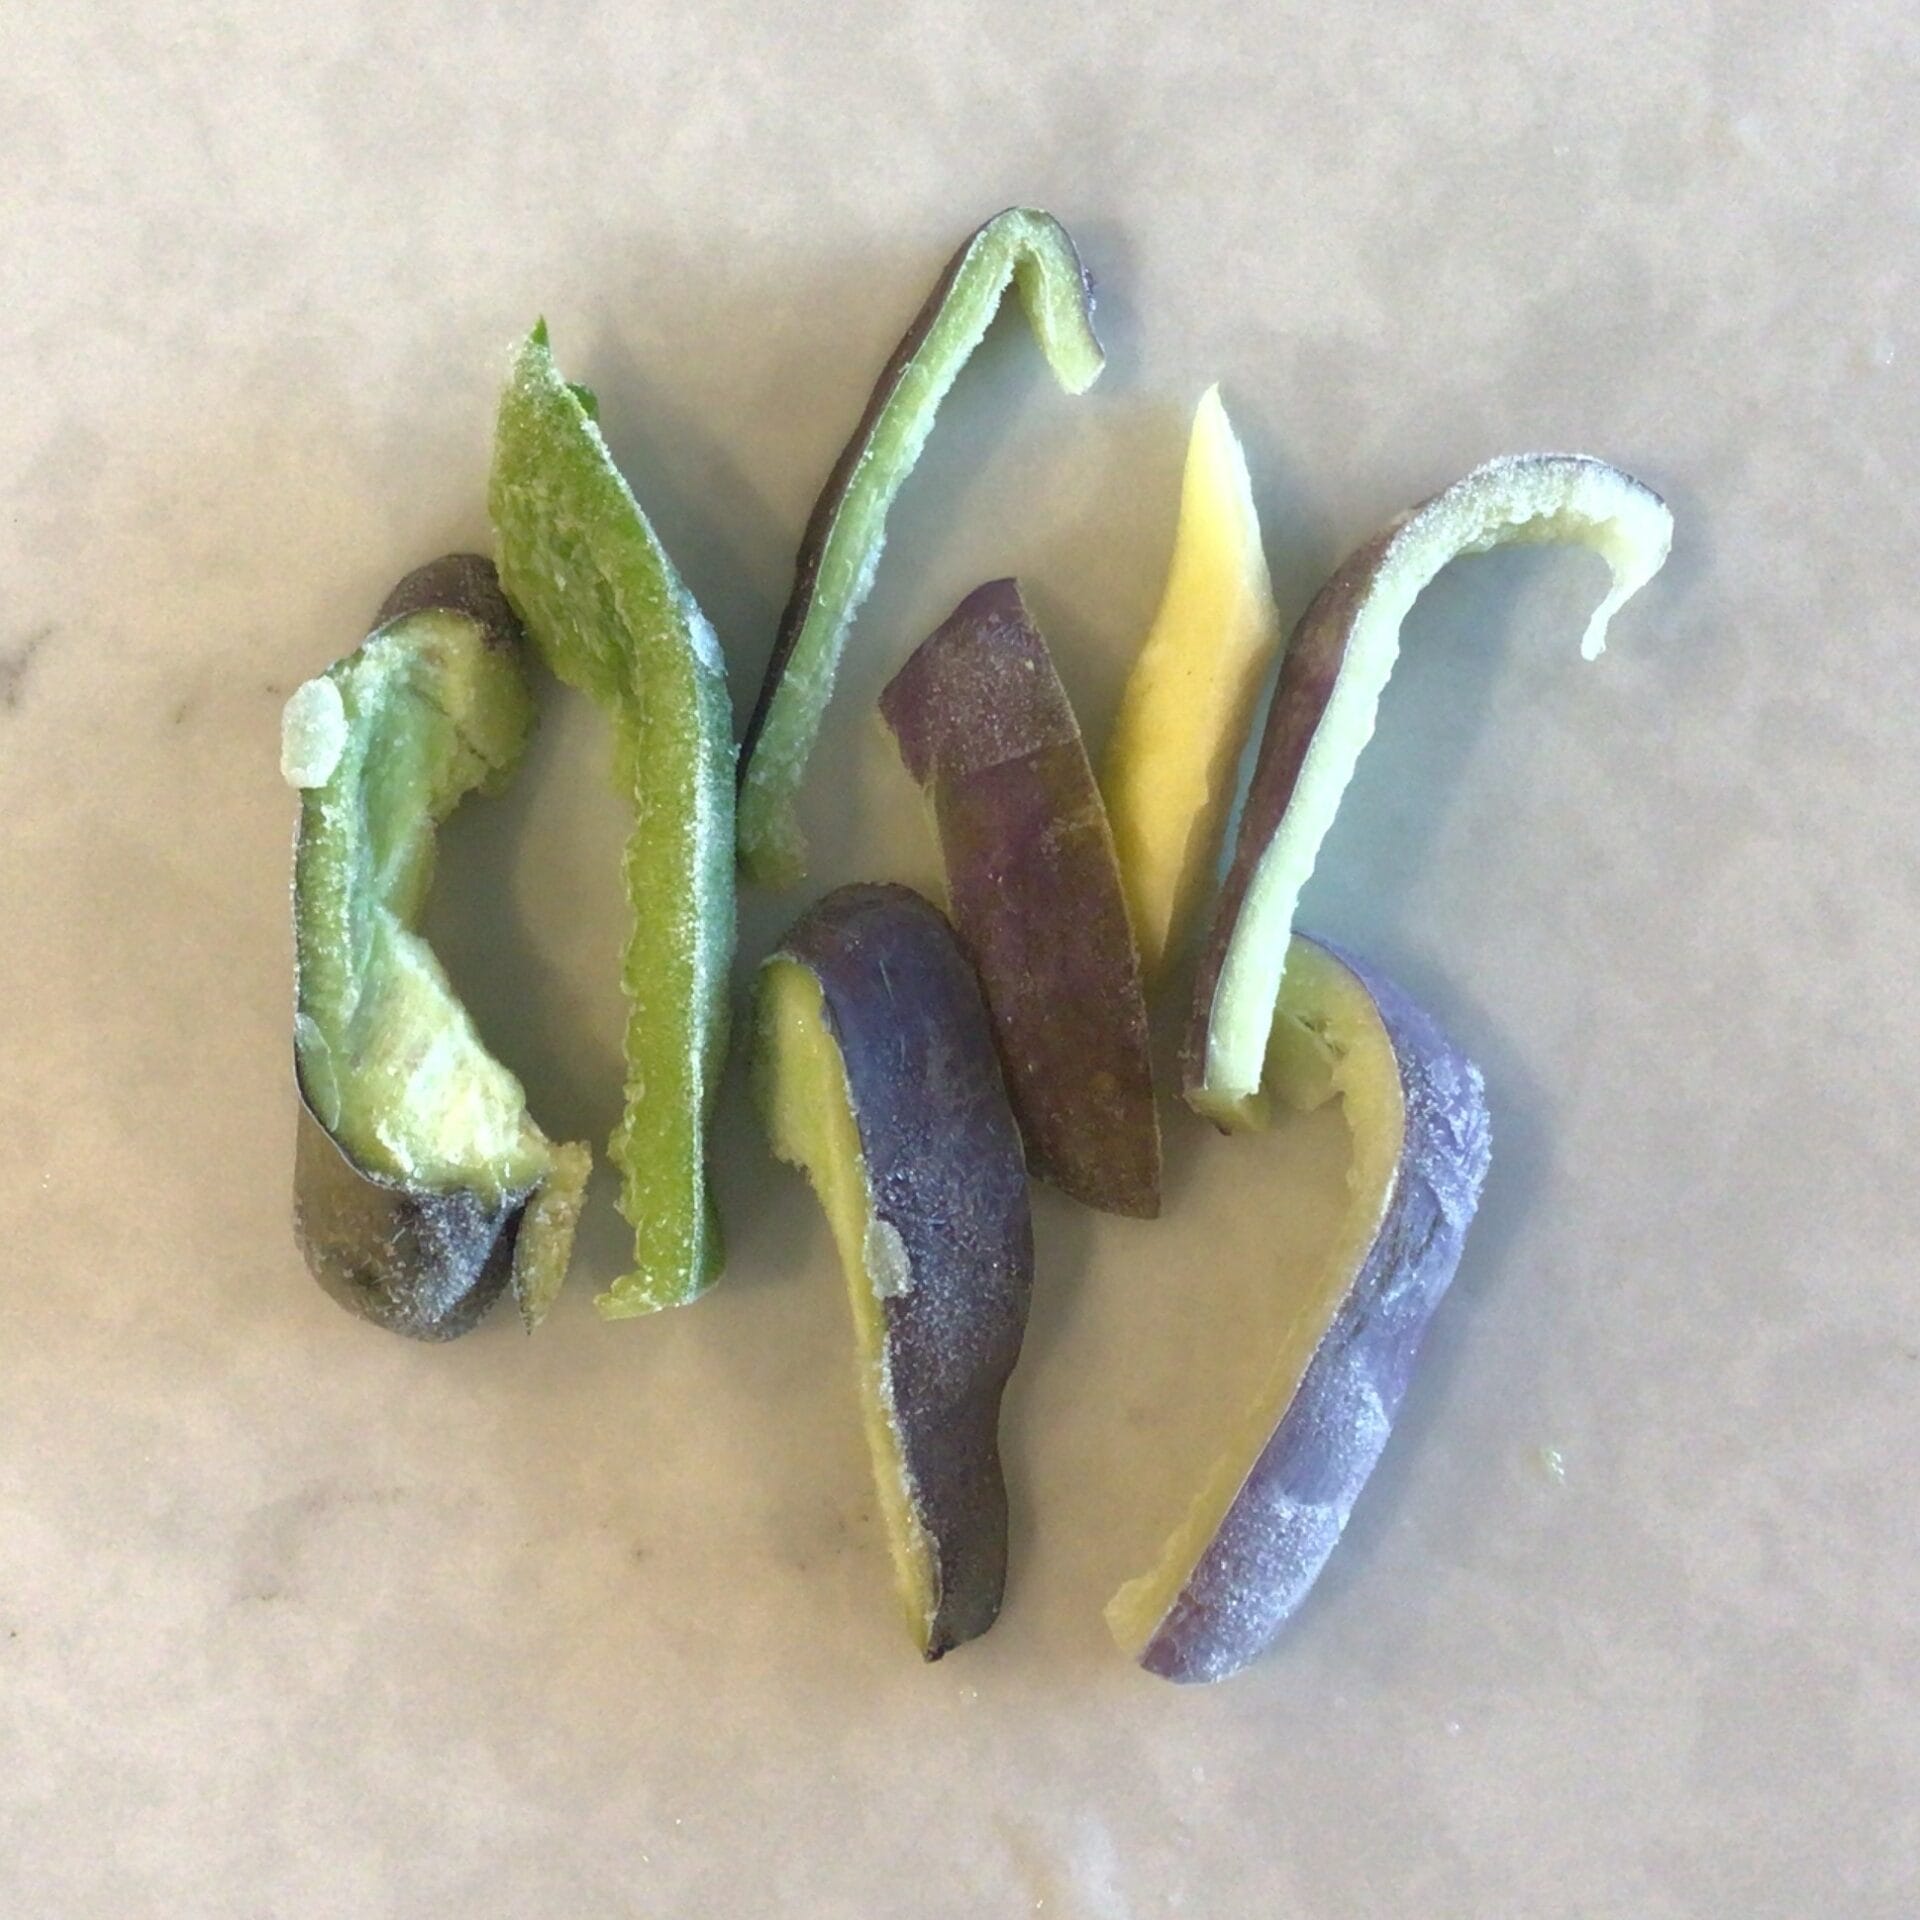 lilac and white bell peppers frozen sliced